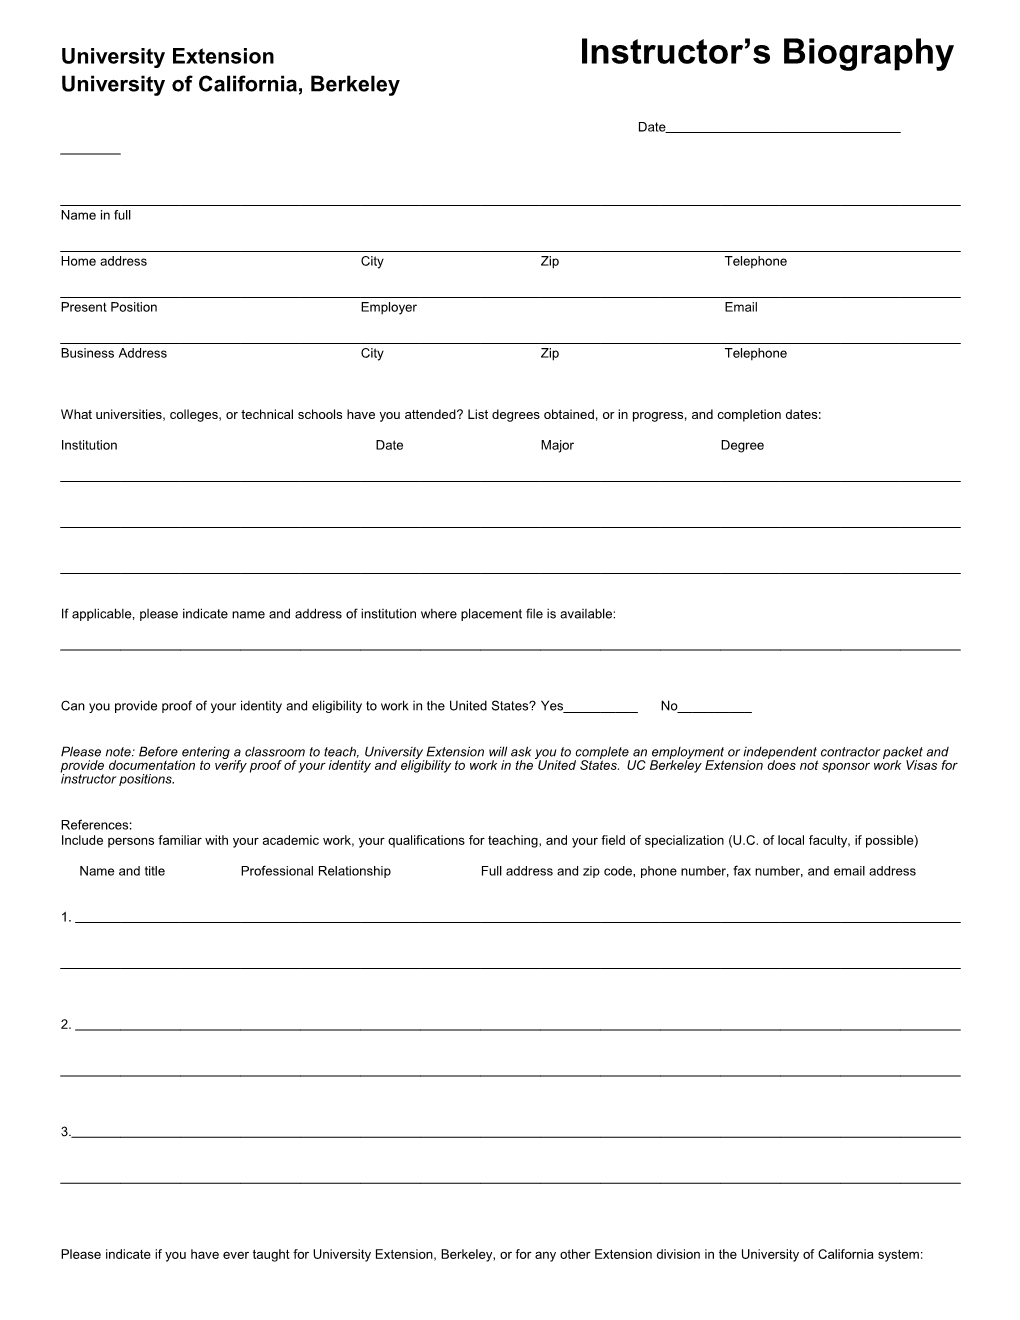 Instructor Employment Application &Course and Instructor Approval Biography Form